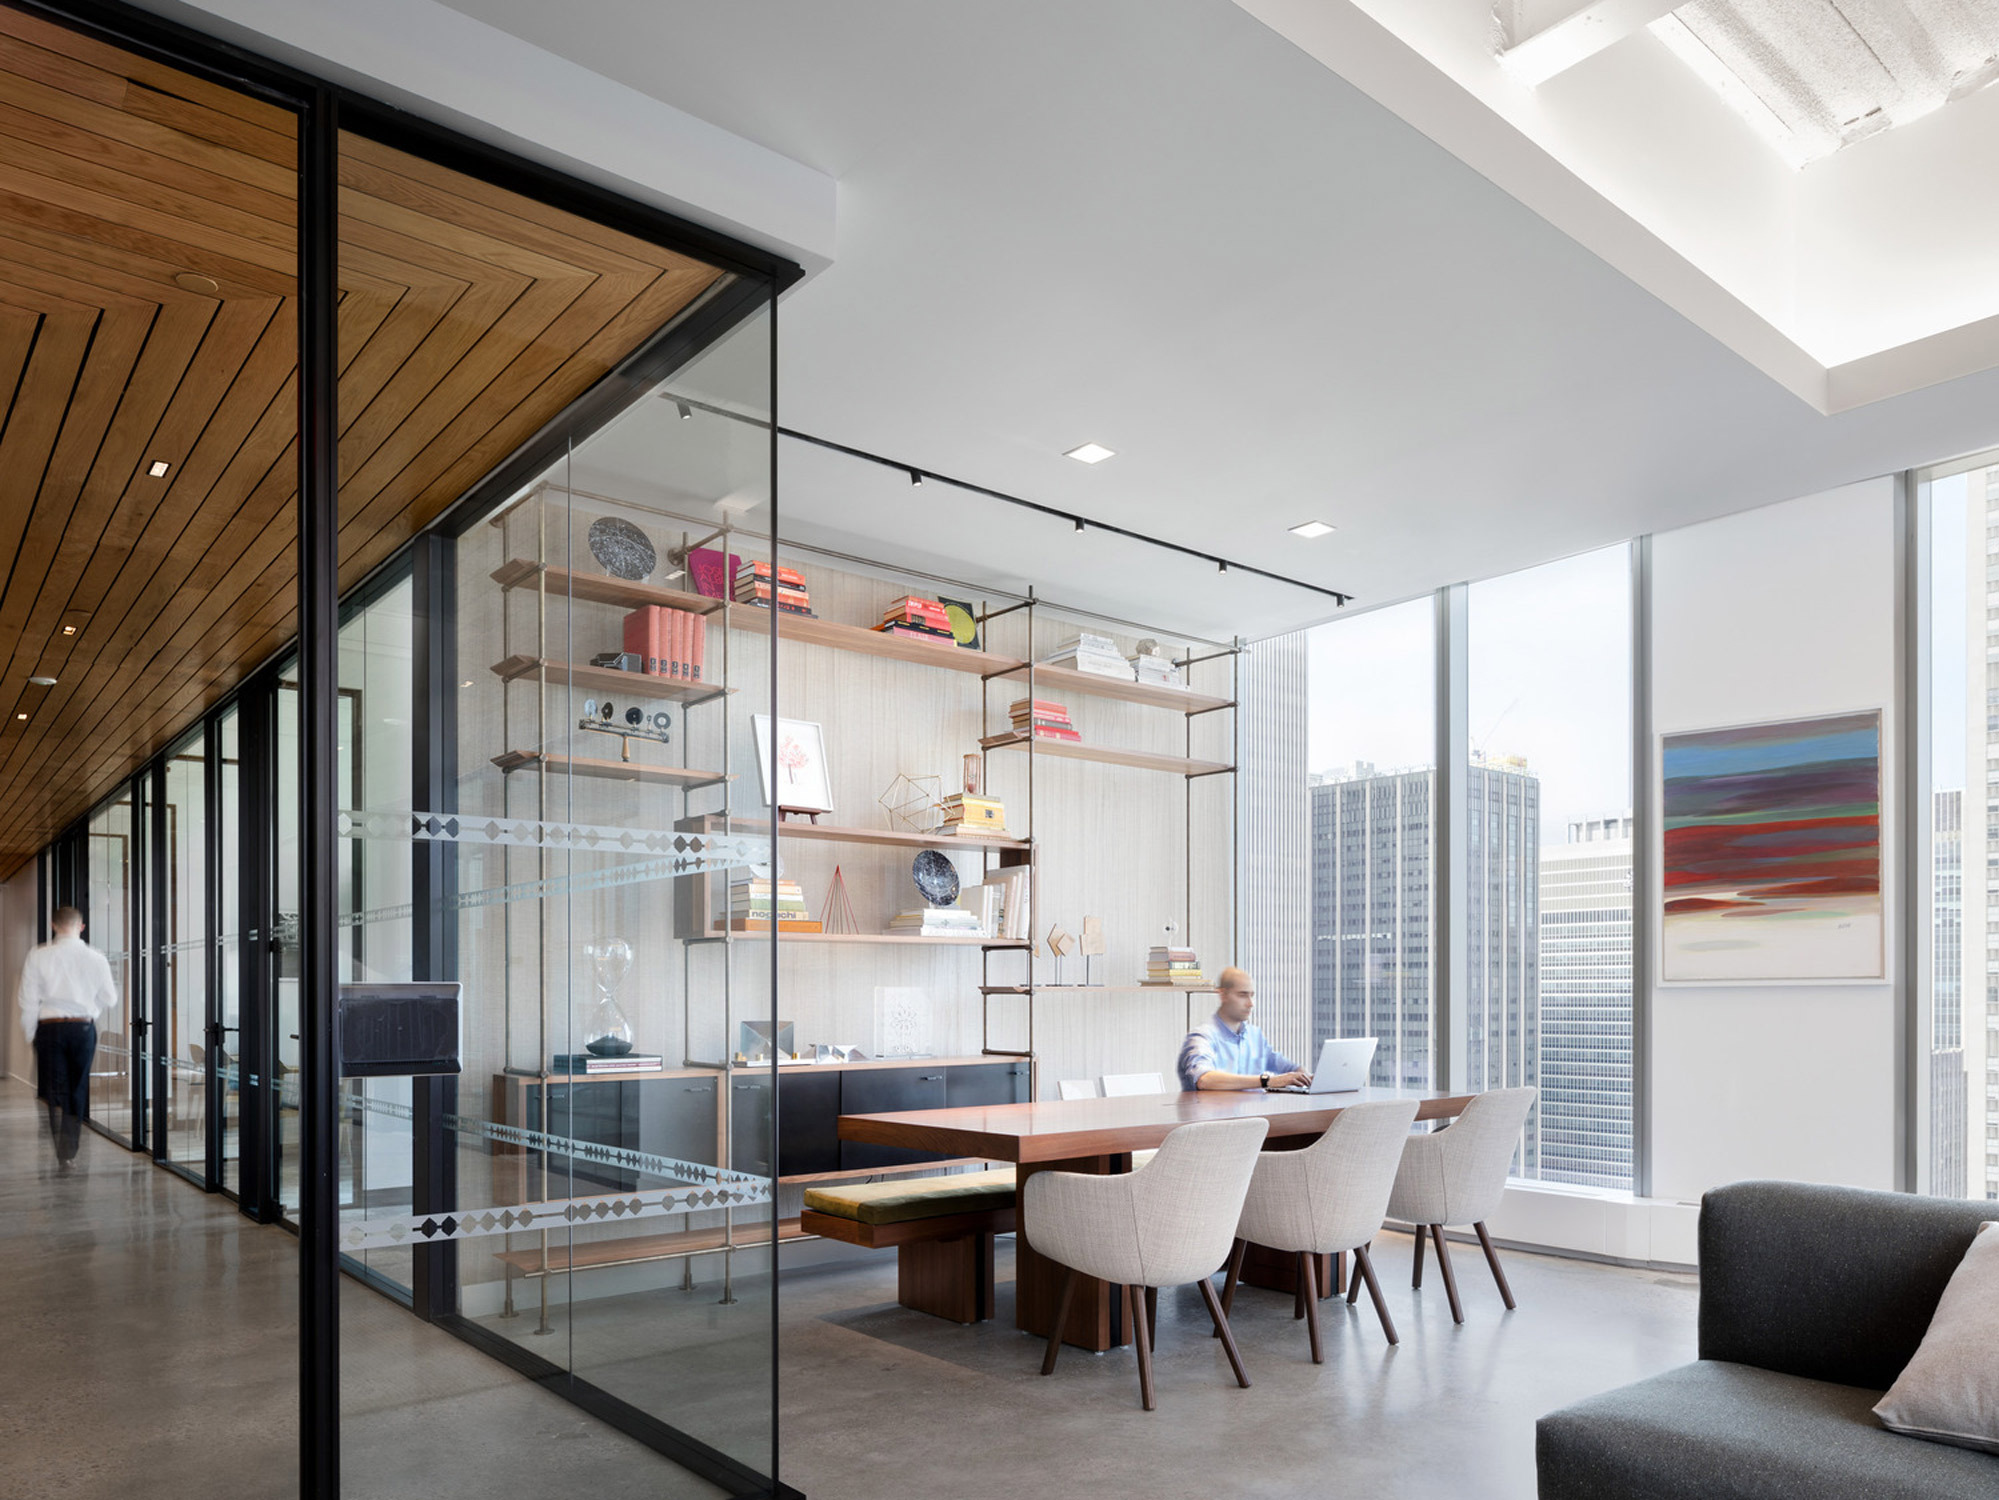 Open-plan office space with floor-to-ceiling windows offering abundant natural light, minimalist furniture, and a warm wood slat ceiling. An elegant glass partition separates the meeting area adorned with a shelving unit showcasing decorative objects.